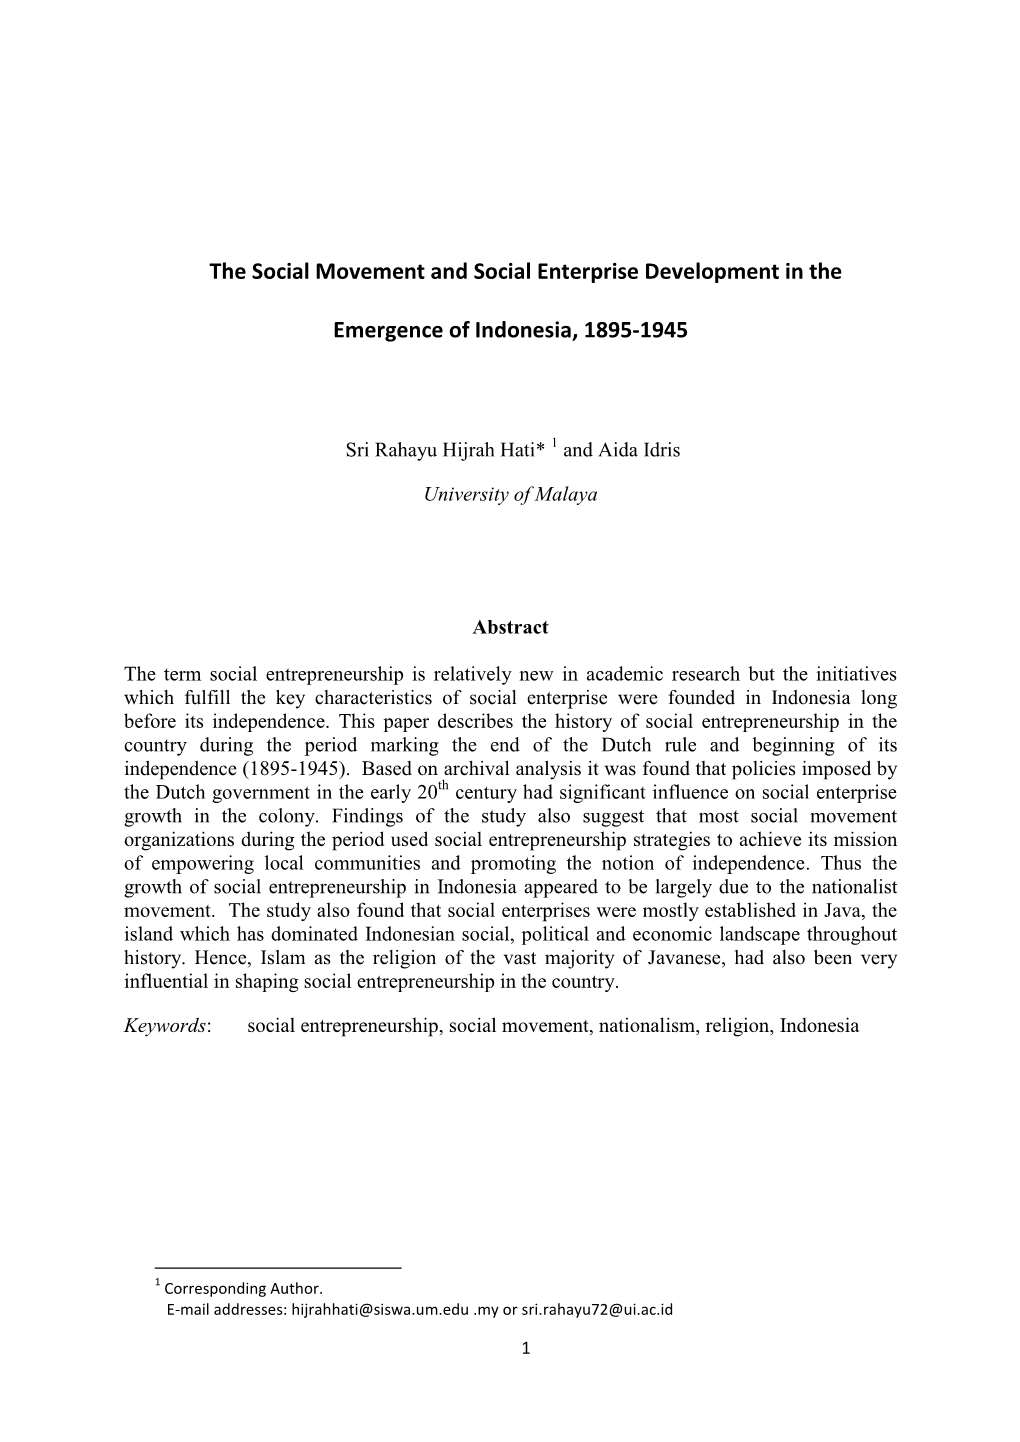 The Social Movement and Social Enterprise Development in the Emergence of Indonesia, 1895-1945